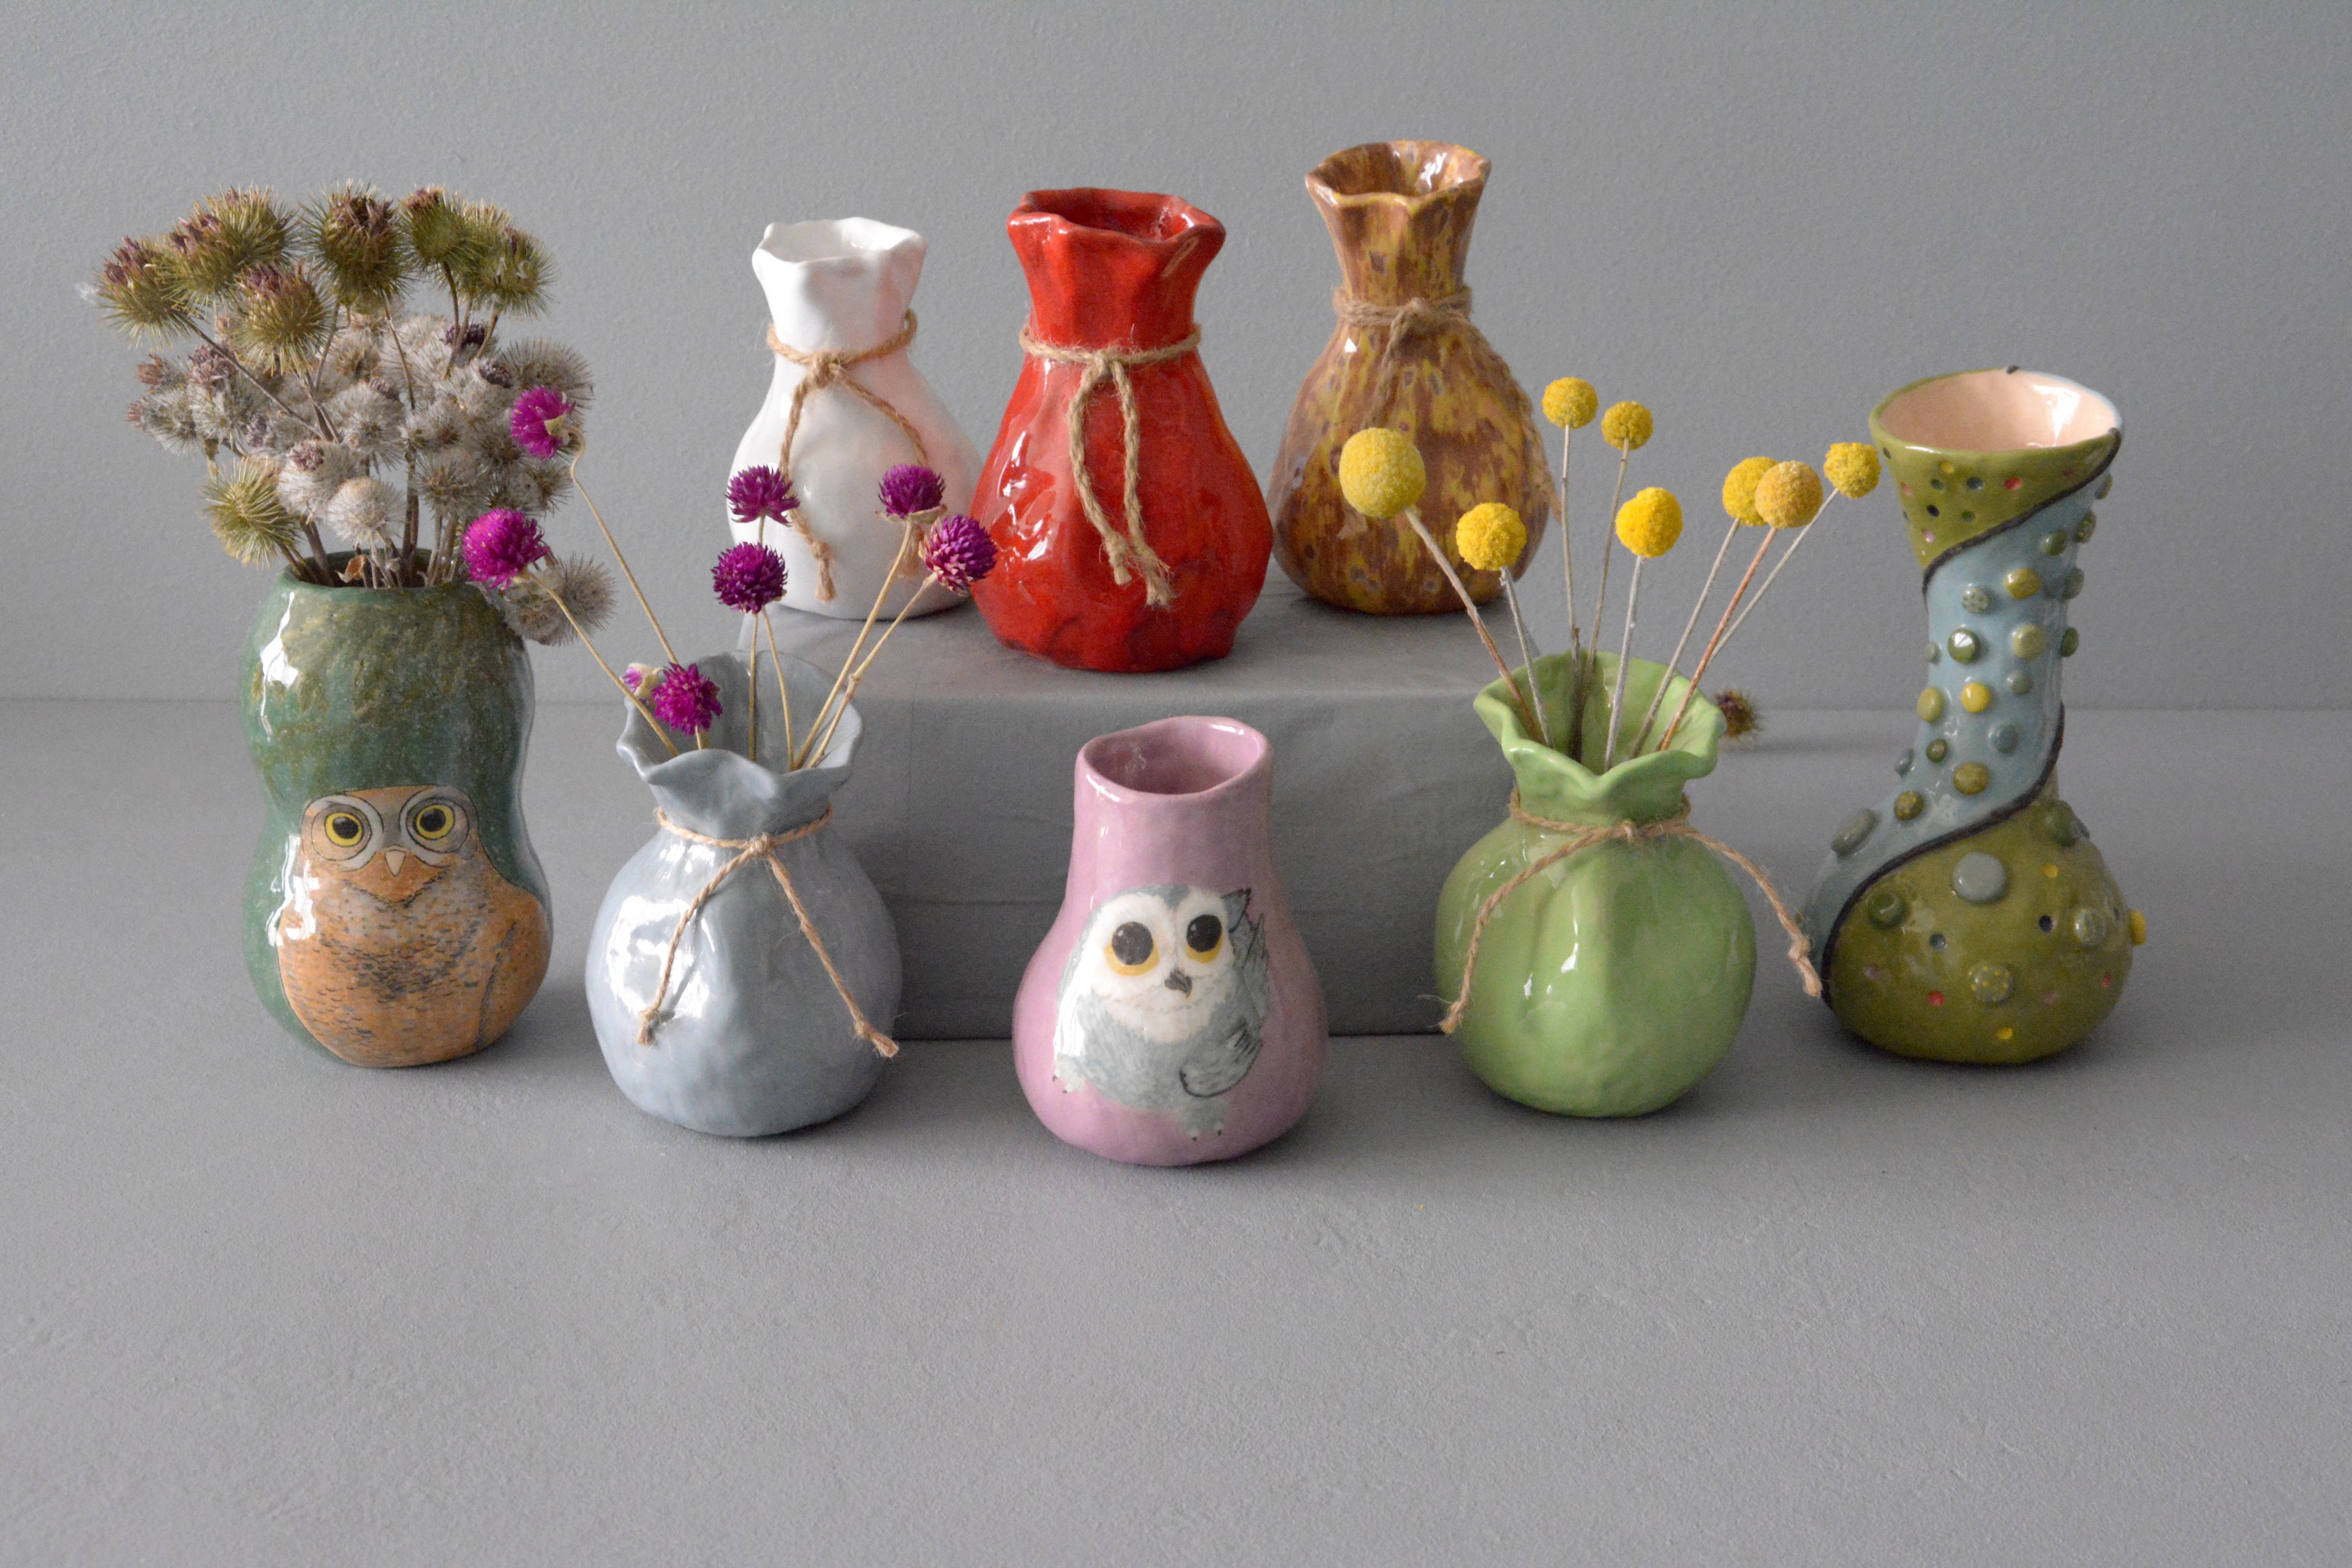 Small vases for flowers